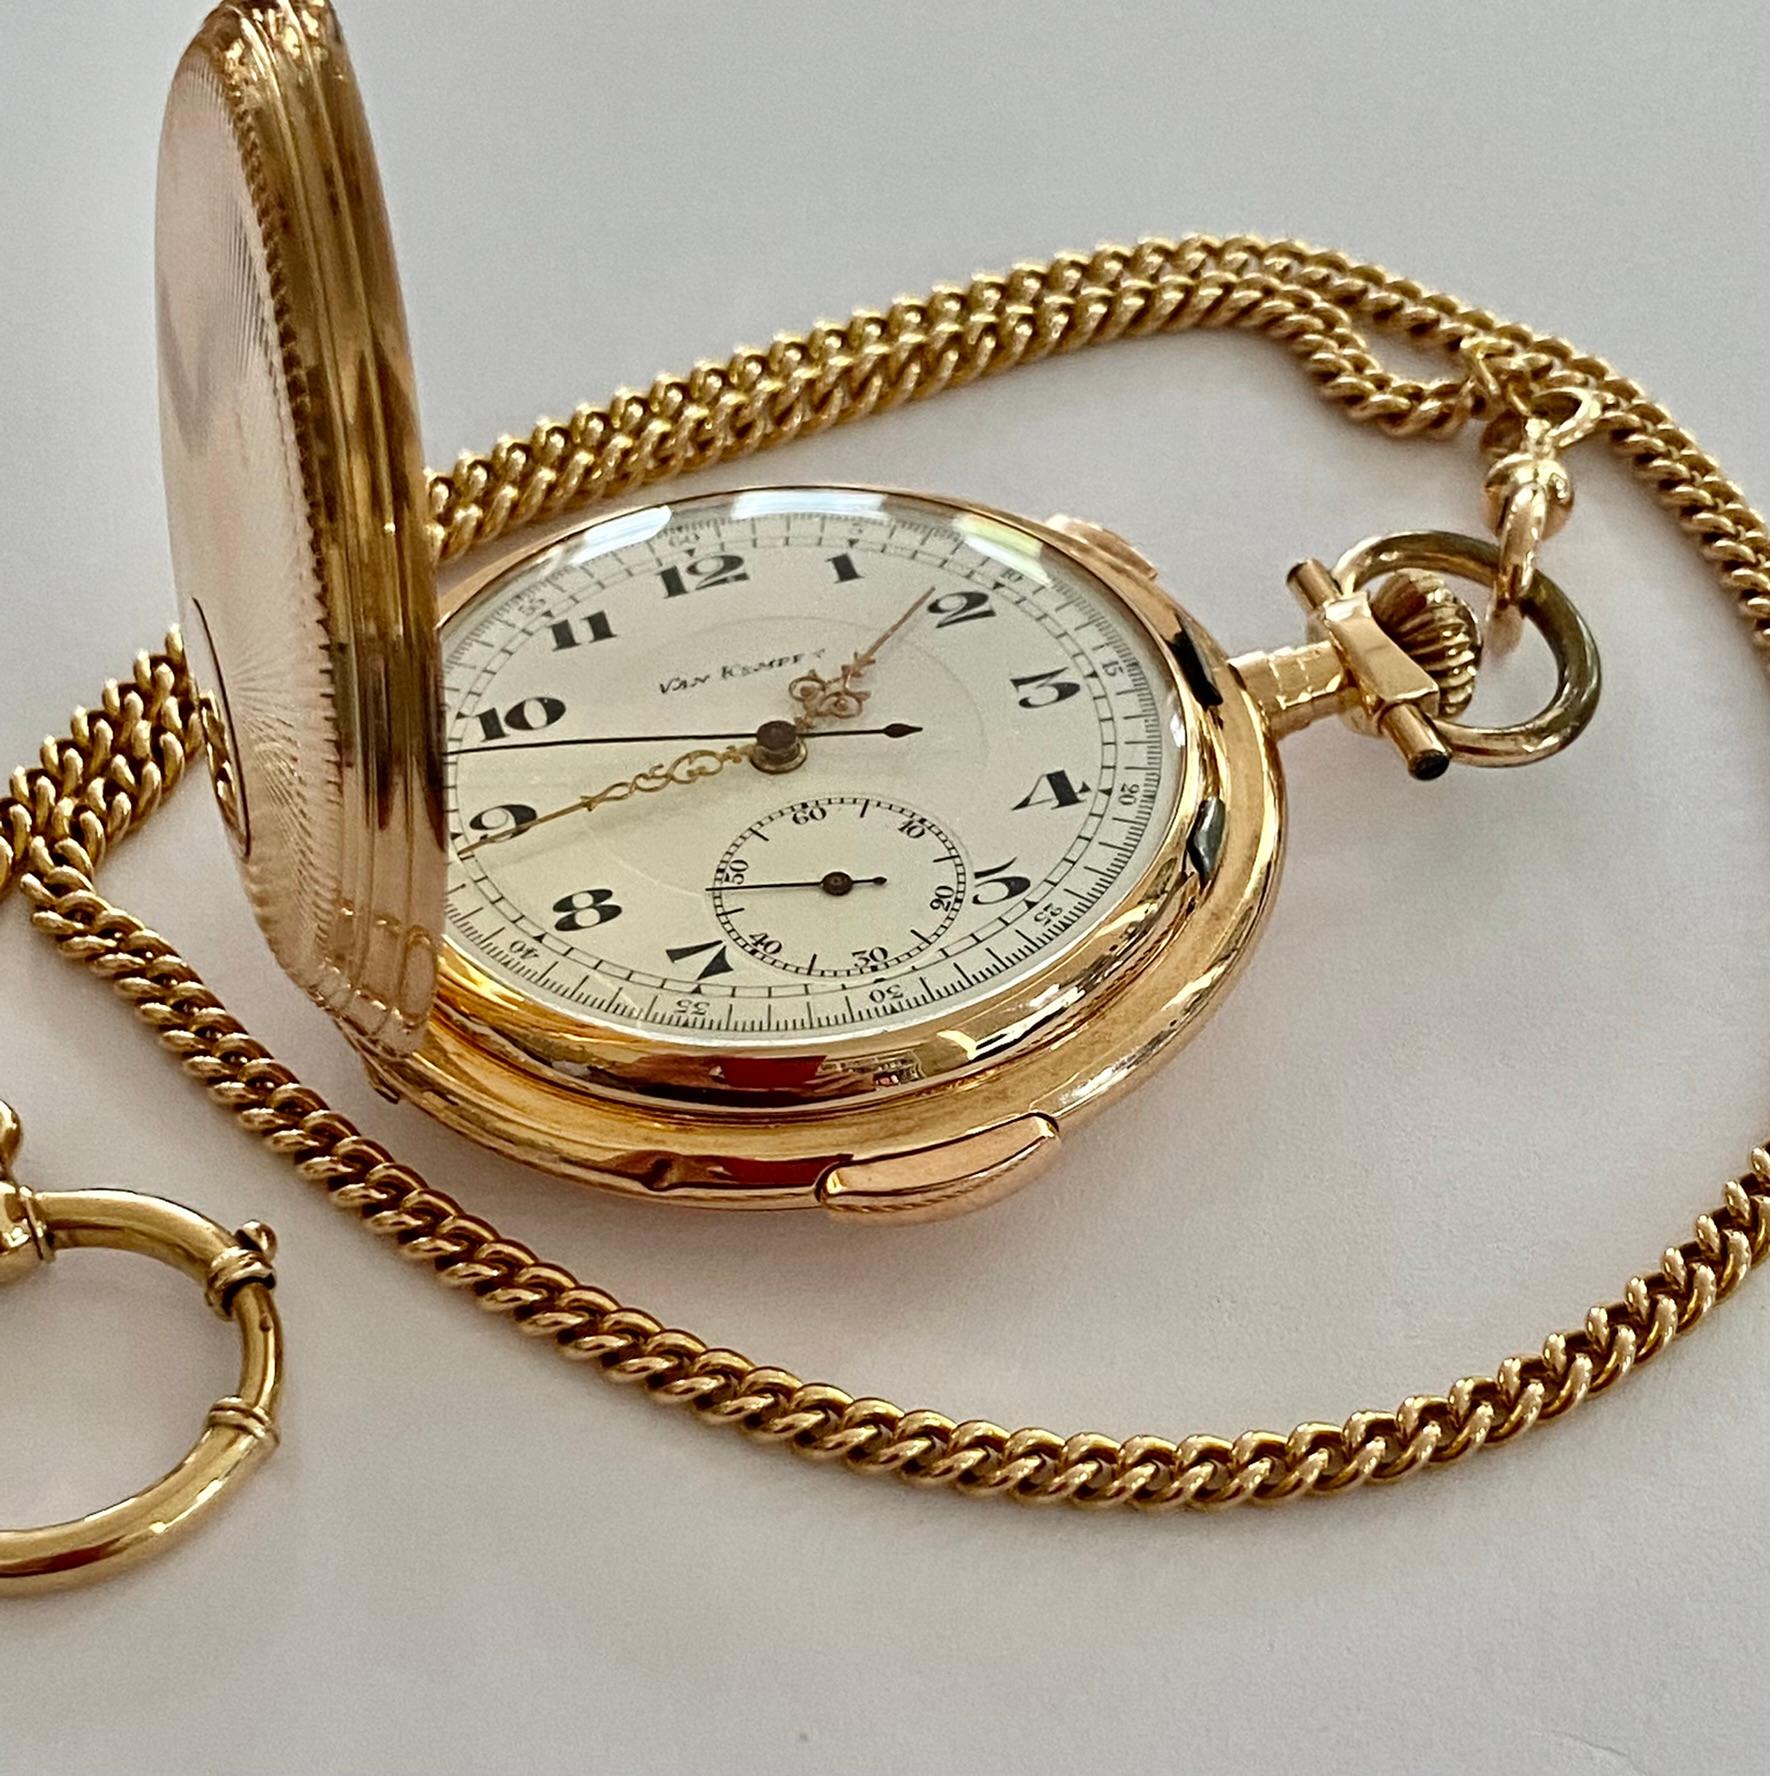 A 14K. rose gold pocket watch with a hunter case
movement: minute repetition striking mechanism and chronograph. (minute)
Manufacture: Le Phare* in Locle (Switzerland)
signed; van Kempen (famous jeweler in the Netherlands ca 1910)
The watch chain of